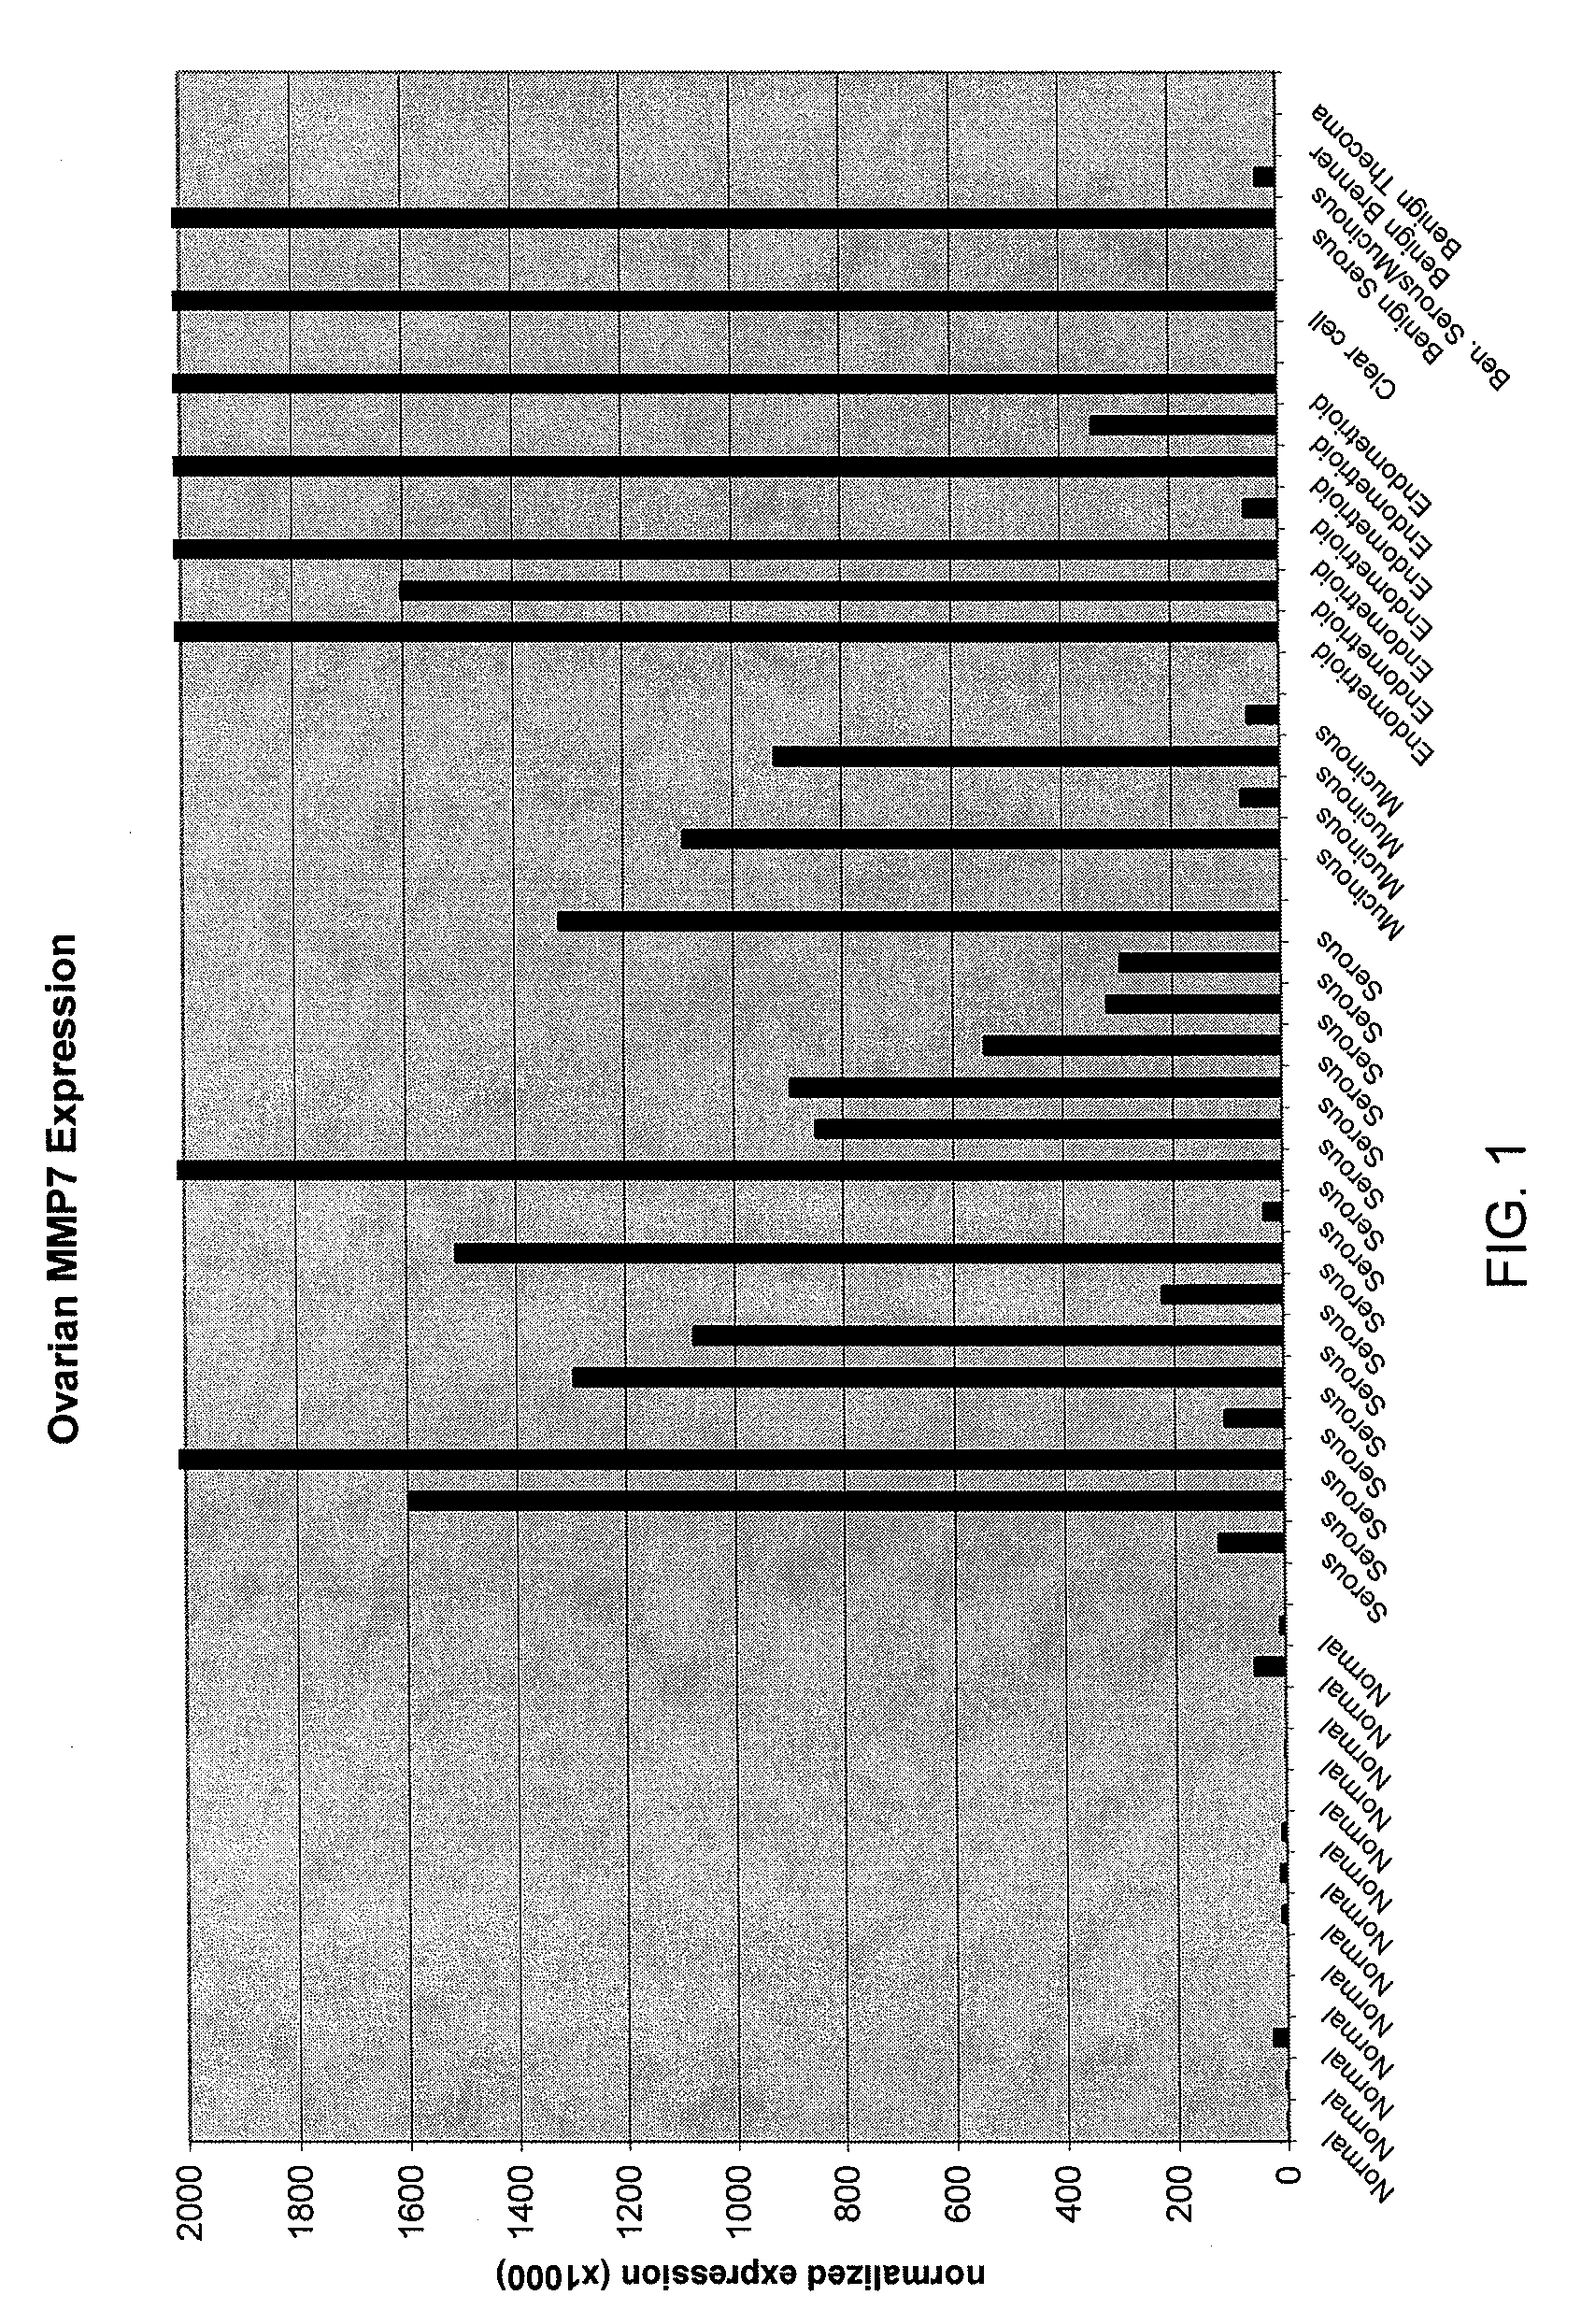 Nucleic acid-based methods and compositions for the detection of ovarian cancer